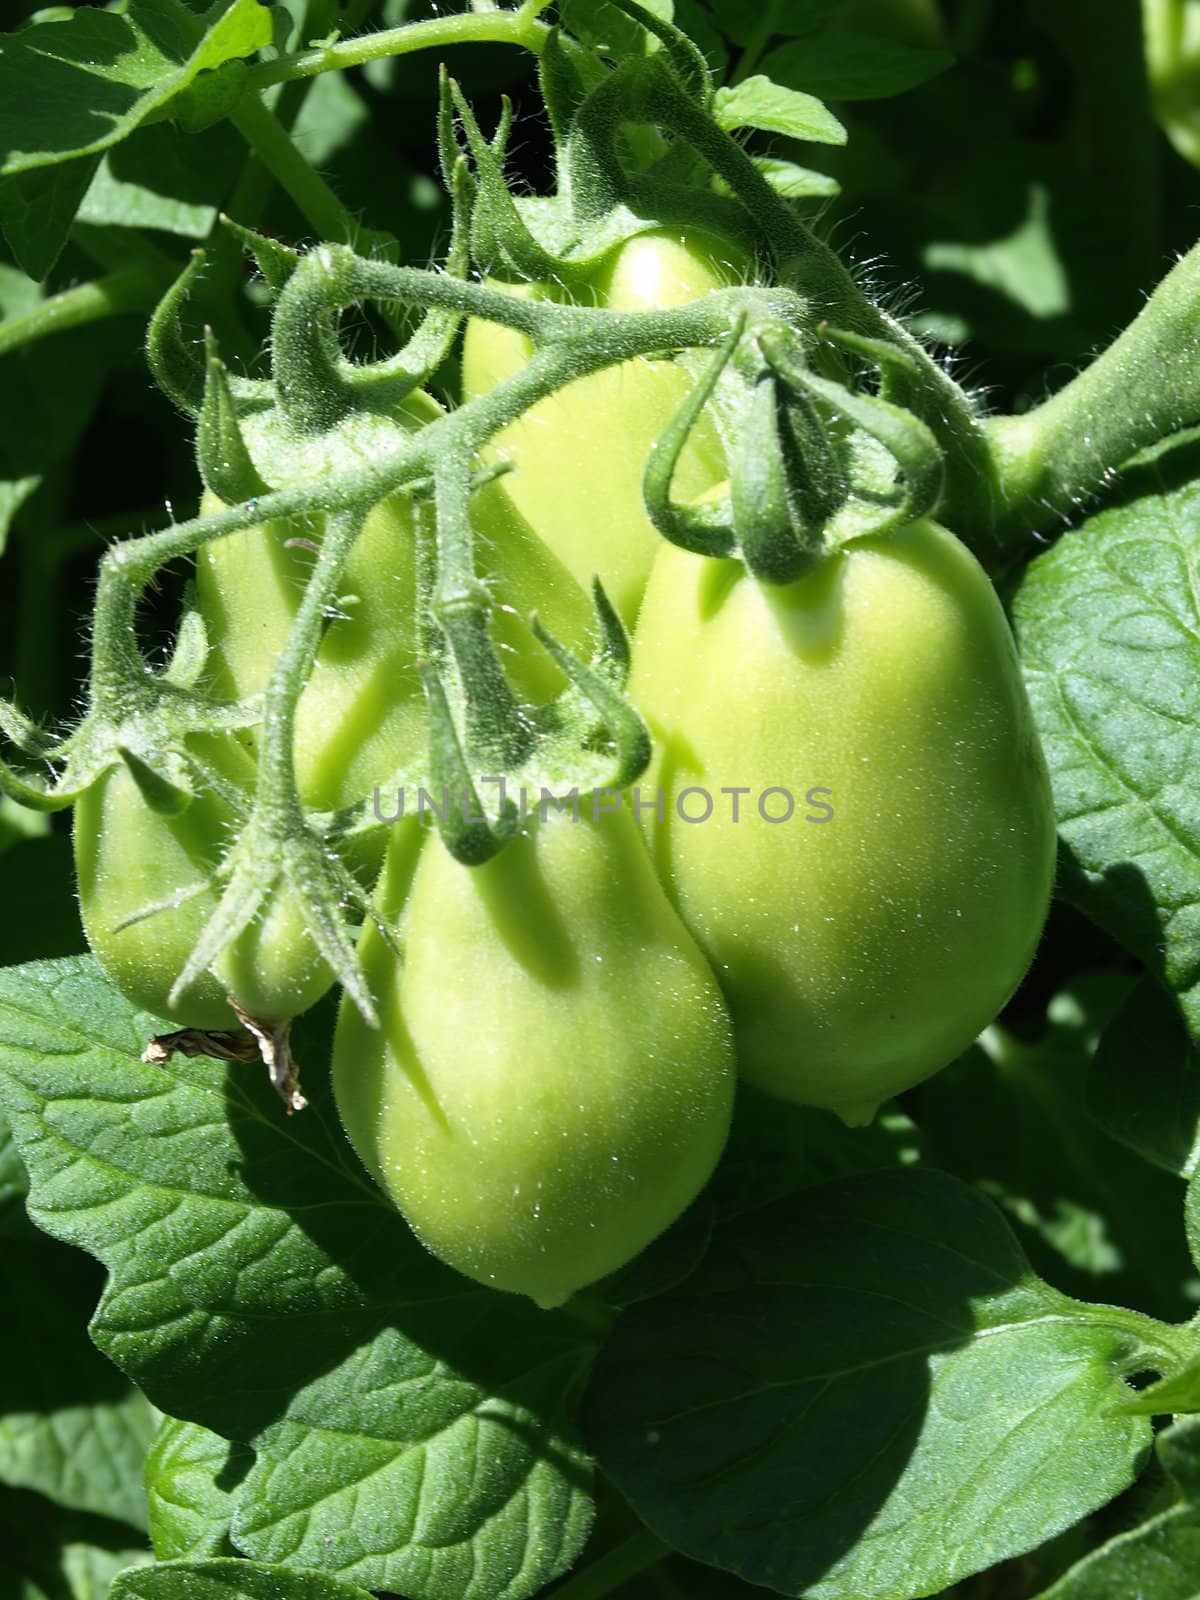 Growing Tomatoes on the Vine by RGebbiePhoto